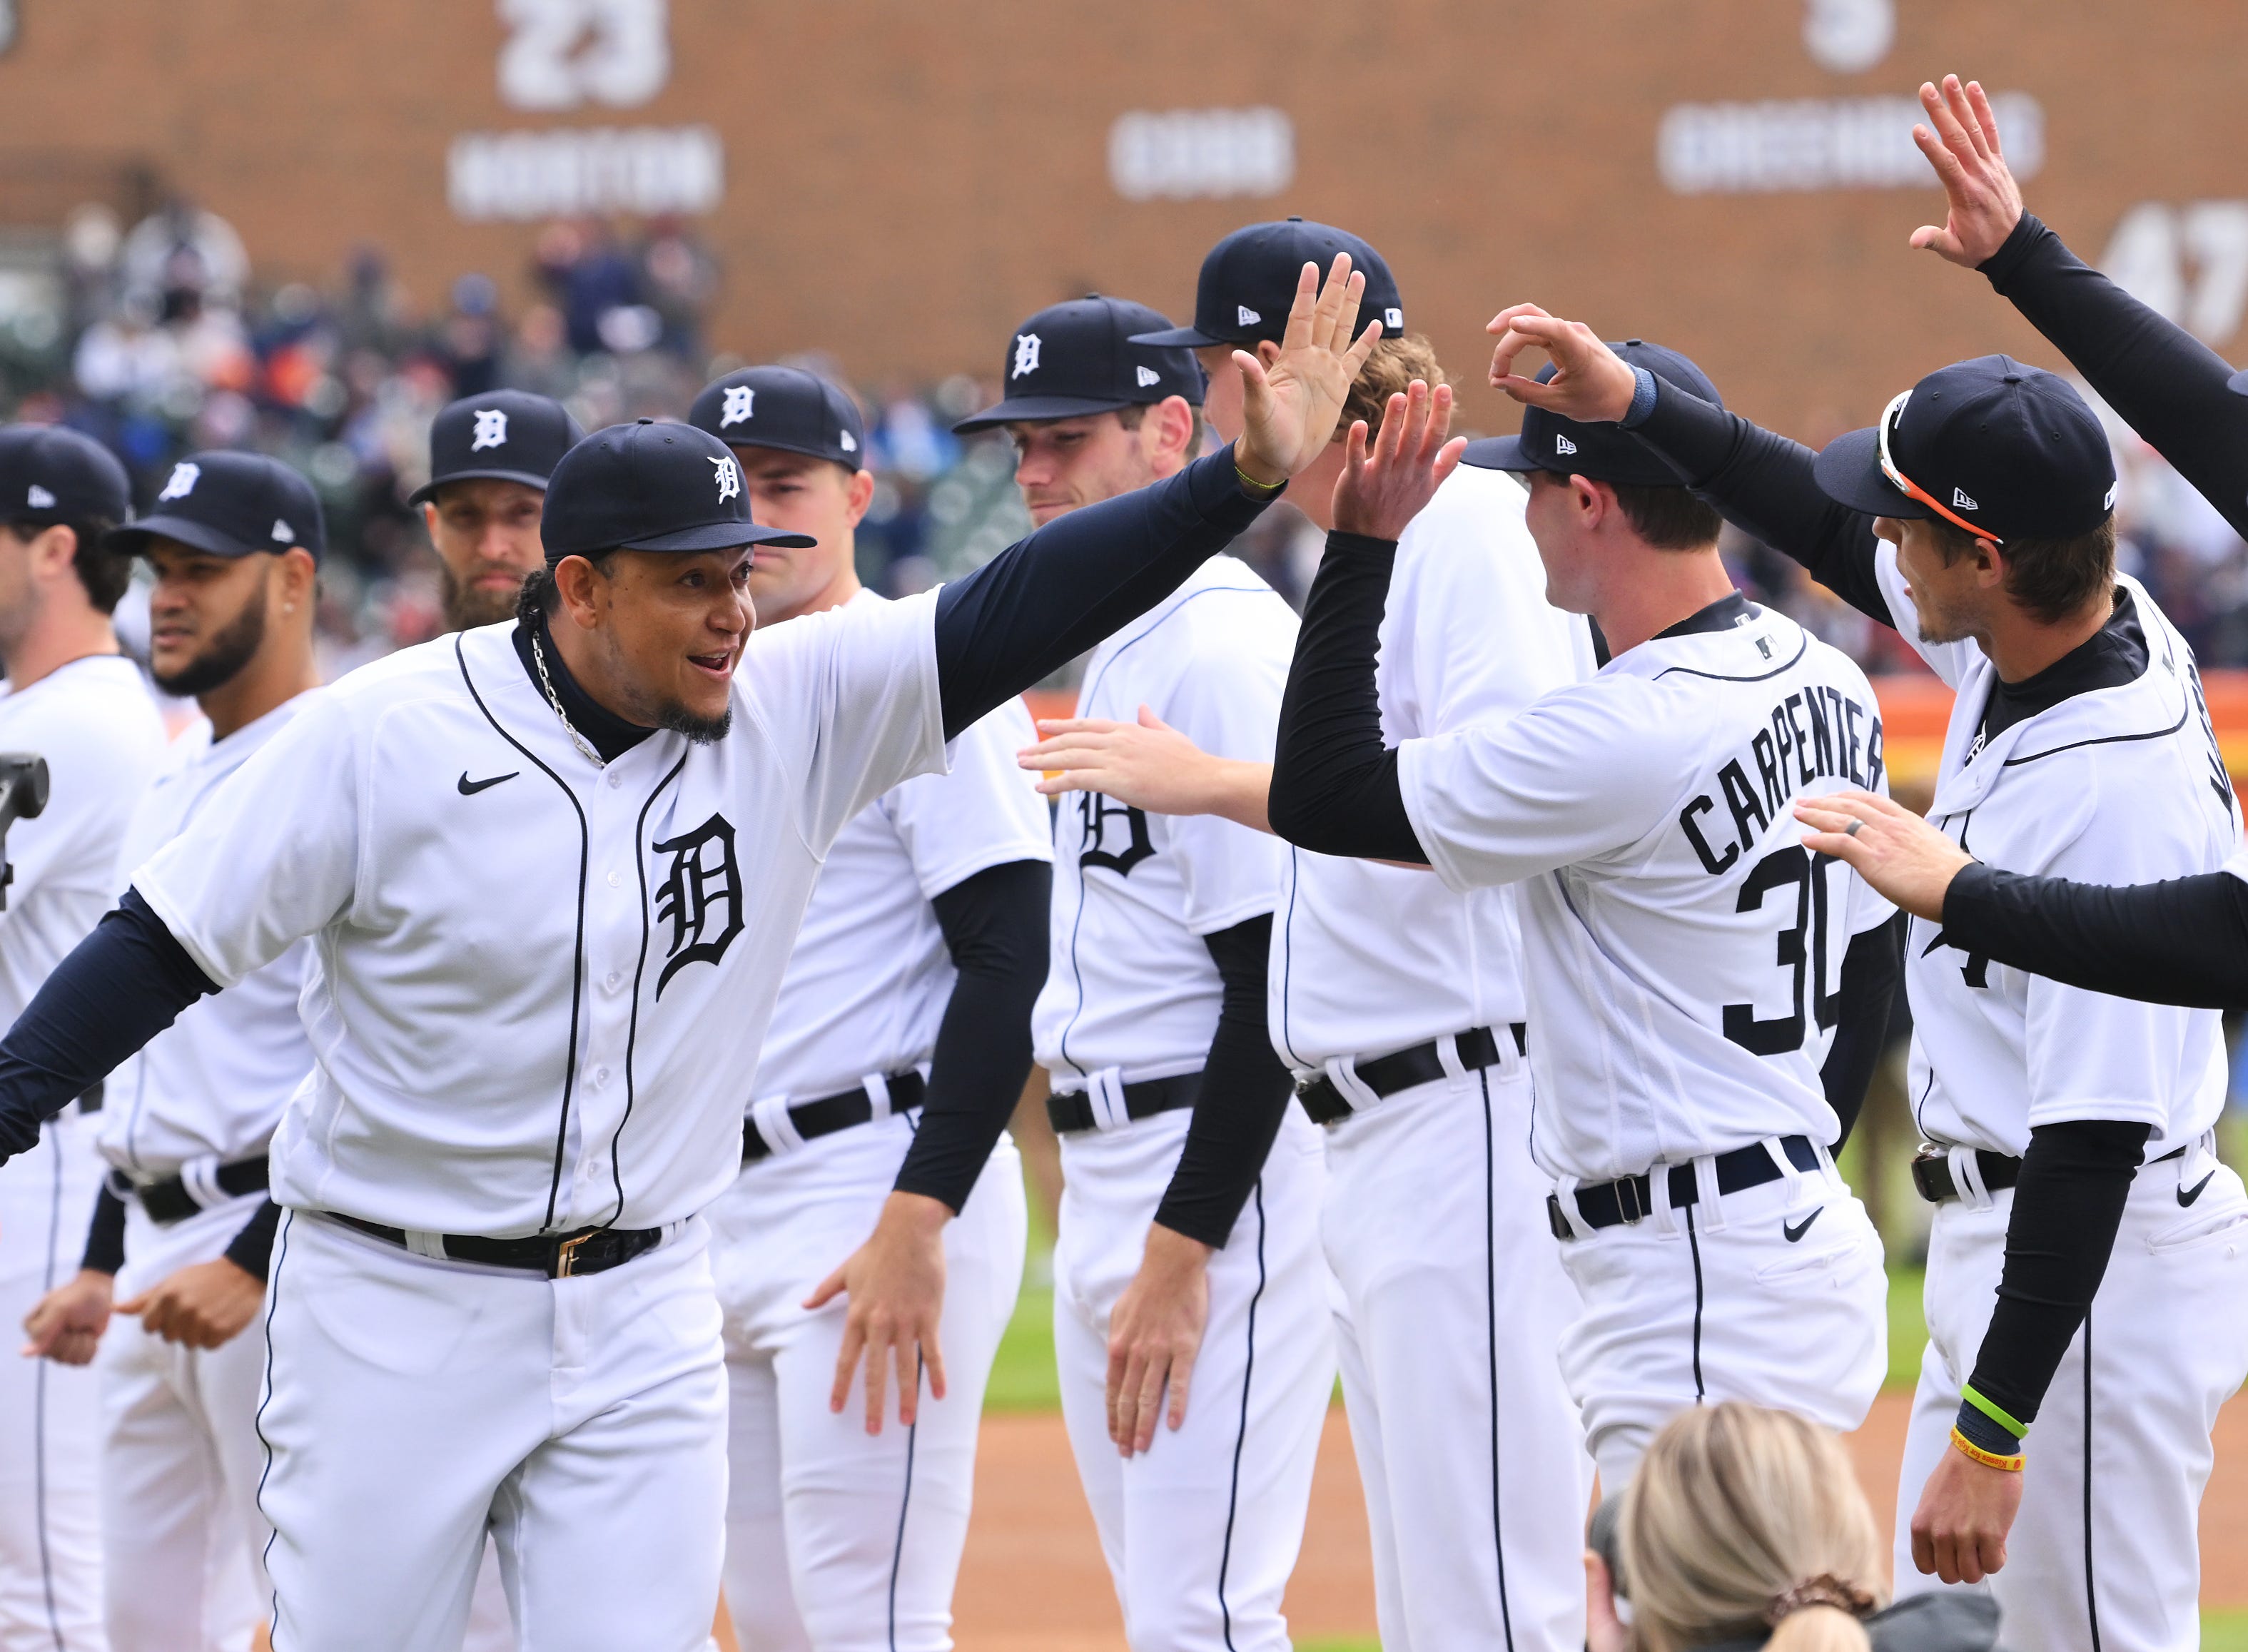 Tigers slugger Miguel Cabrera high fives teammates during pre-game introductions during his final home opener in Detroit. Tigers home opener against the Boston Red Sox in Detroit on Thursday, April 6, 2023.